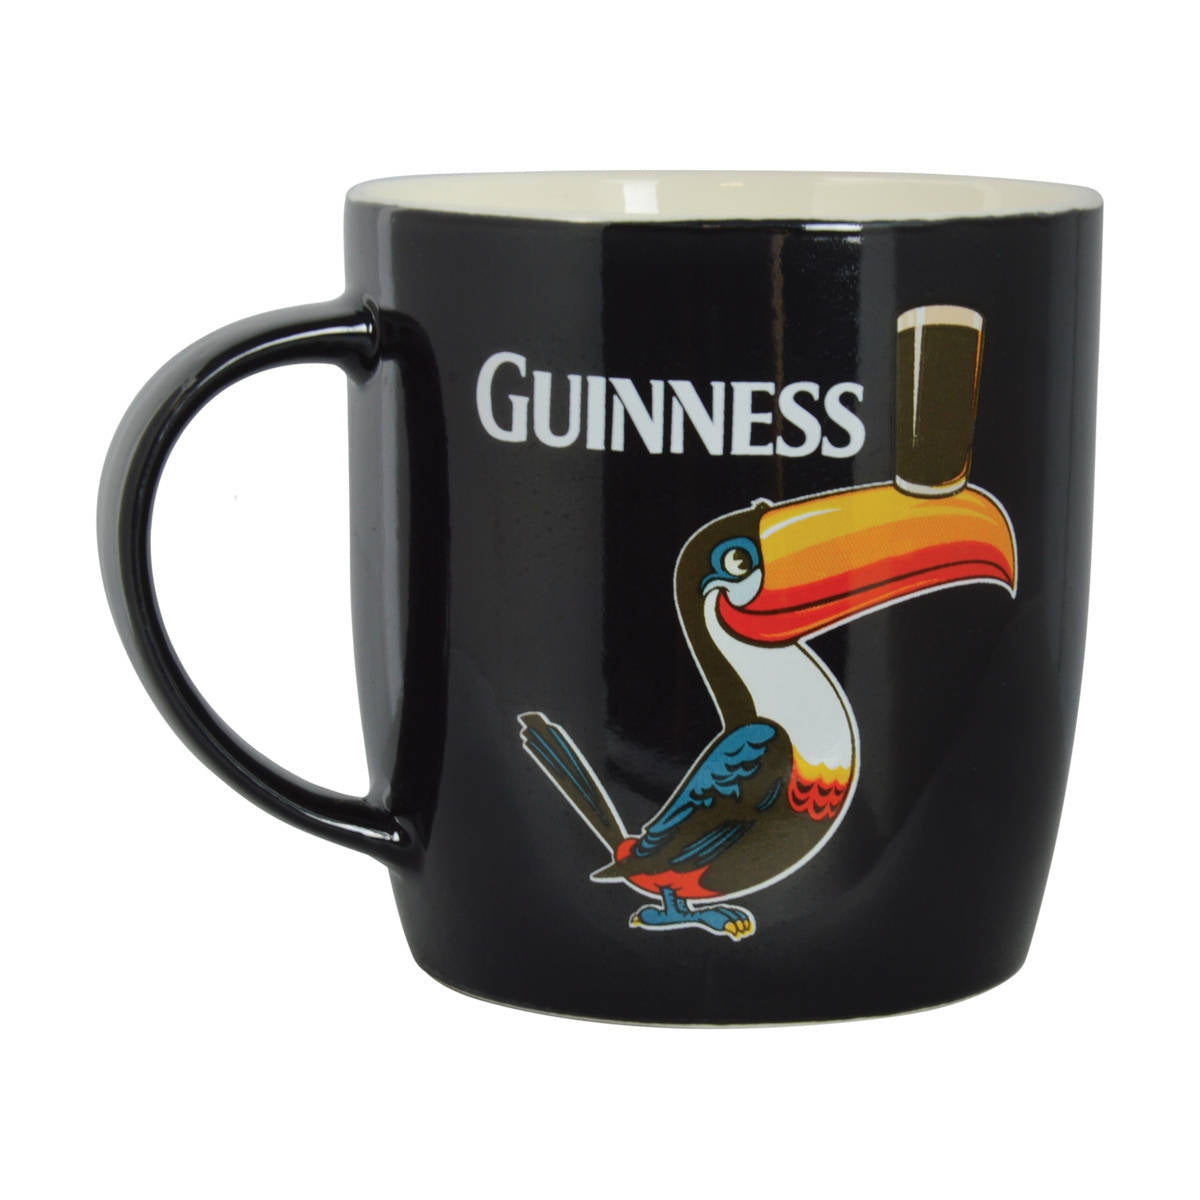 A Guinness Black Mug with Standing Toucan, perfect for fans of the Guinness brand looking for a unique collectible item to add to their collection.